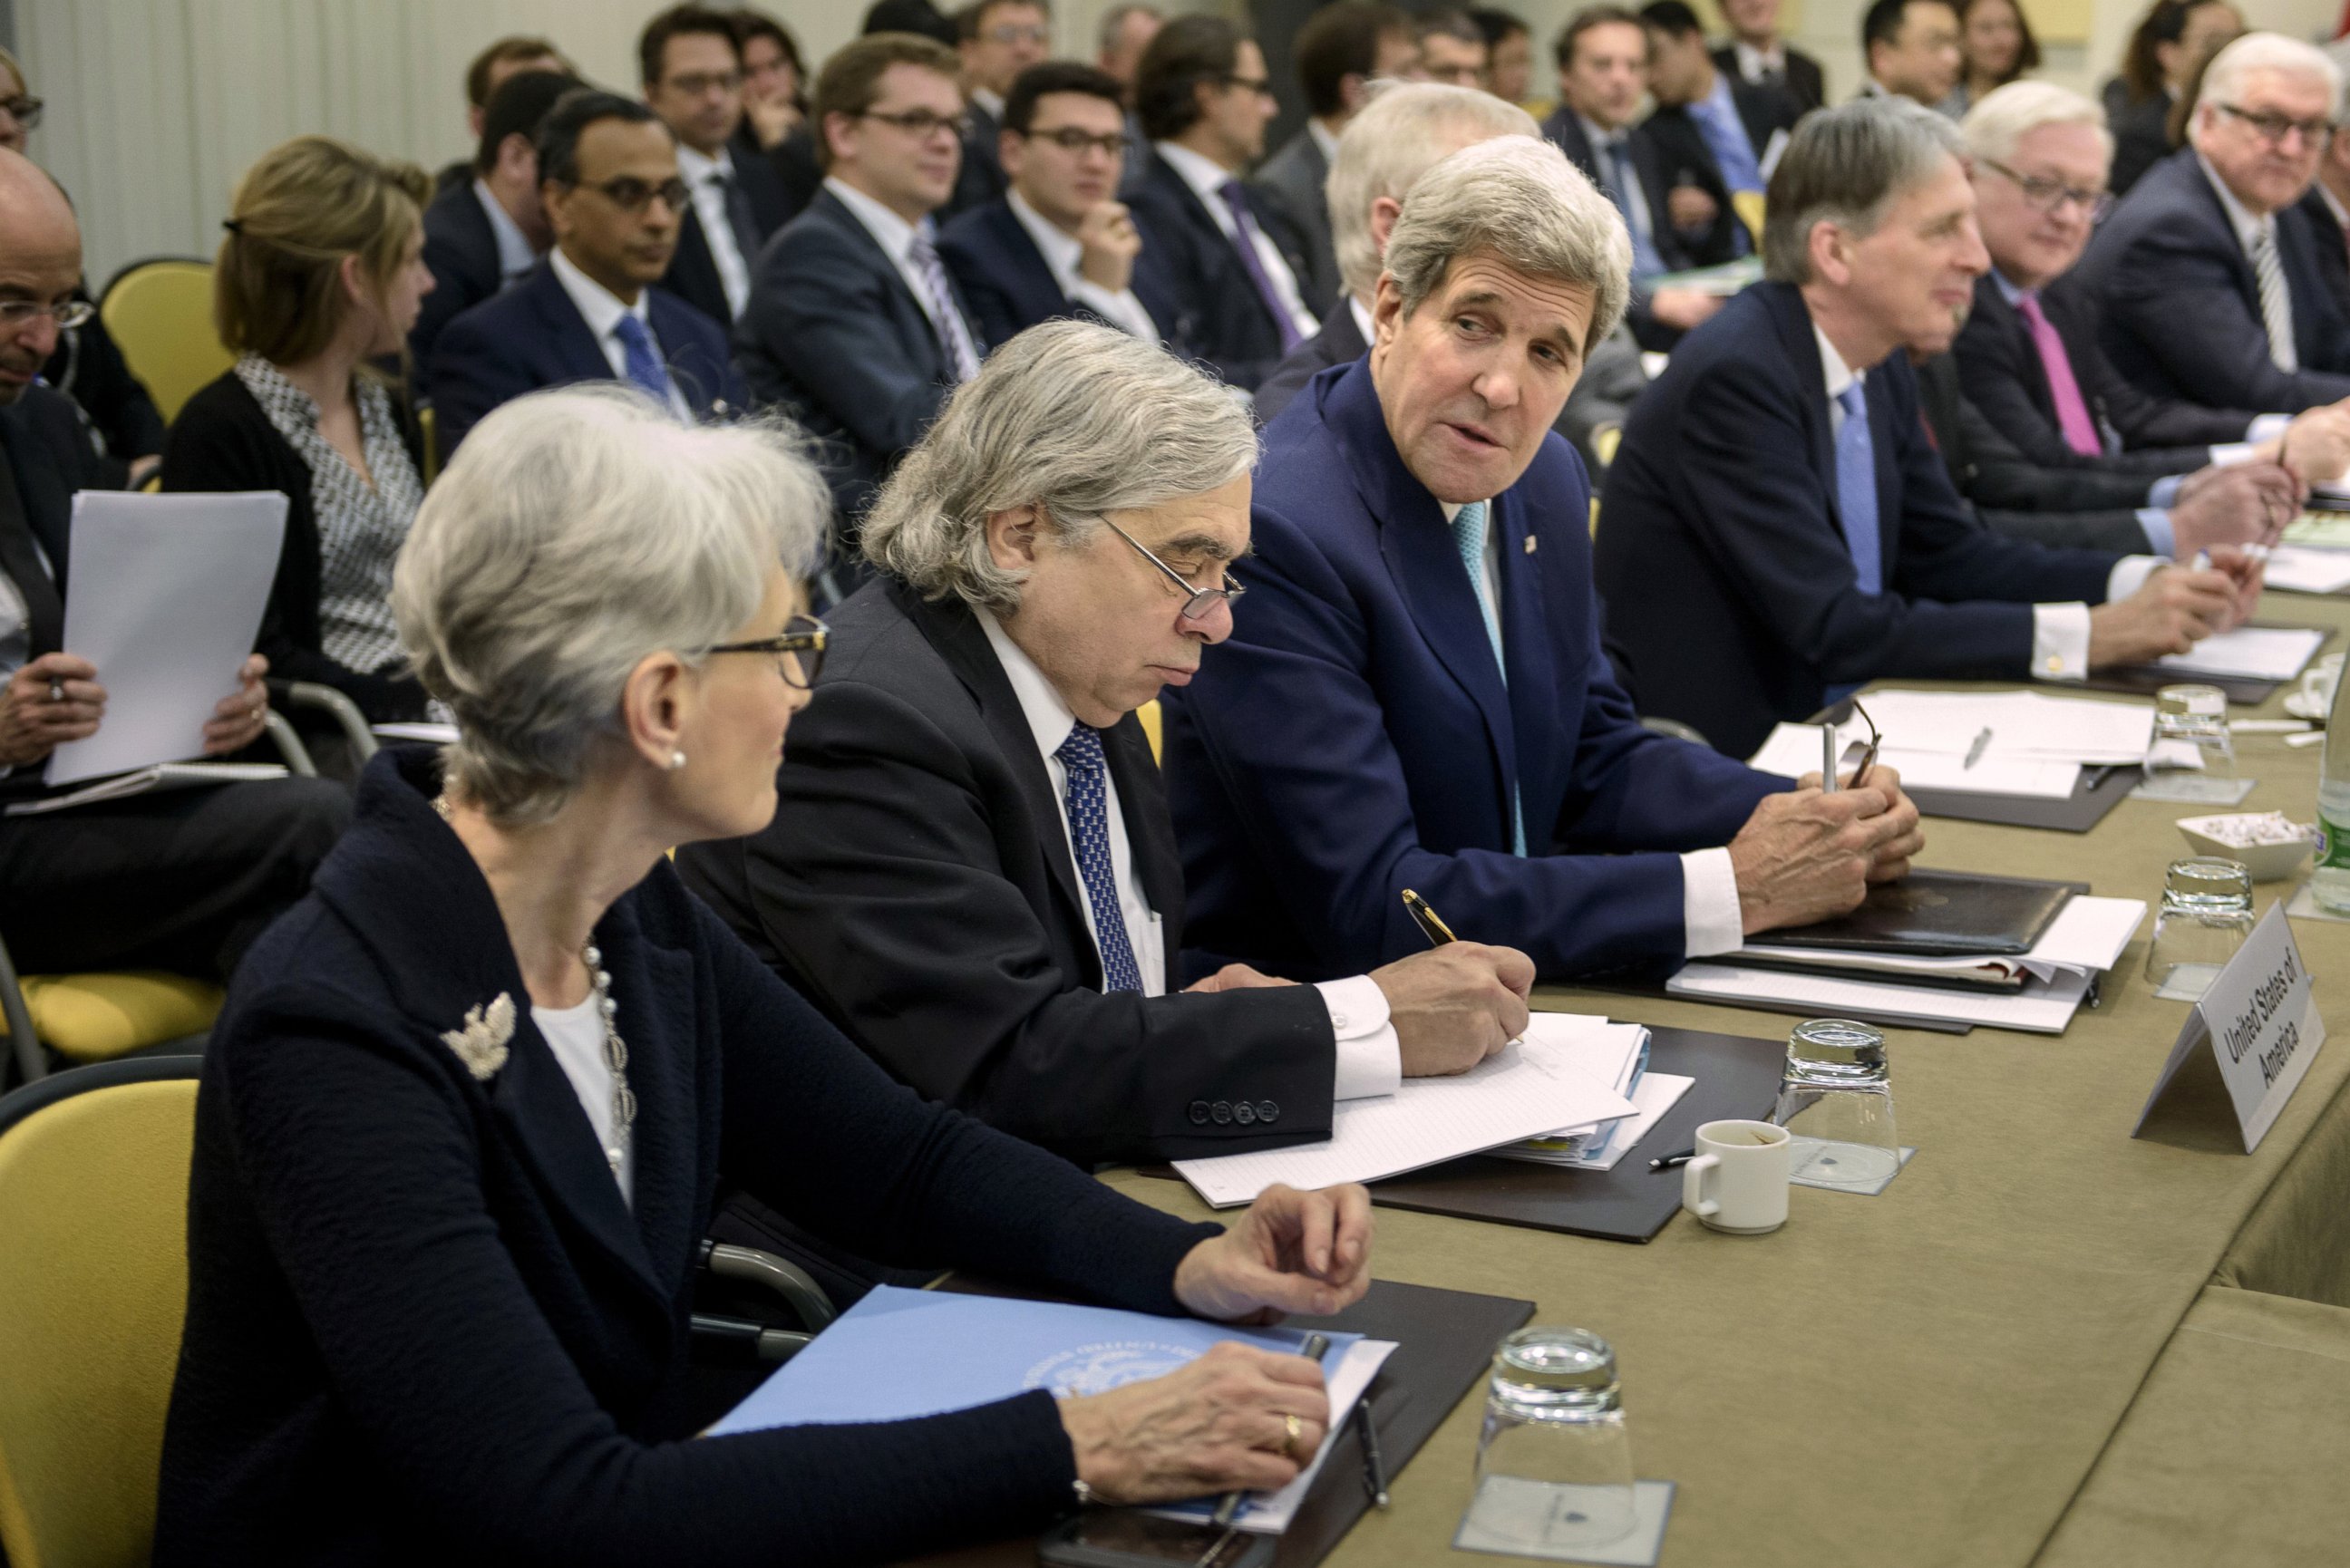 PHOTO: U.S. Secretary of State John Kerry, third left, chats with U.S. Under Secretary for Political Affairs Wendy Sherman, as U.S. Secretary of Energy Ernest Moniz, second right, at the Beau Rivage Palace Hotel in Lausanne, Switzerland, March 31, 2015.